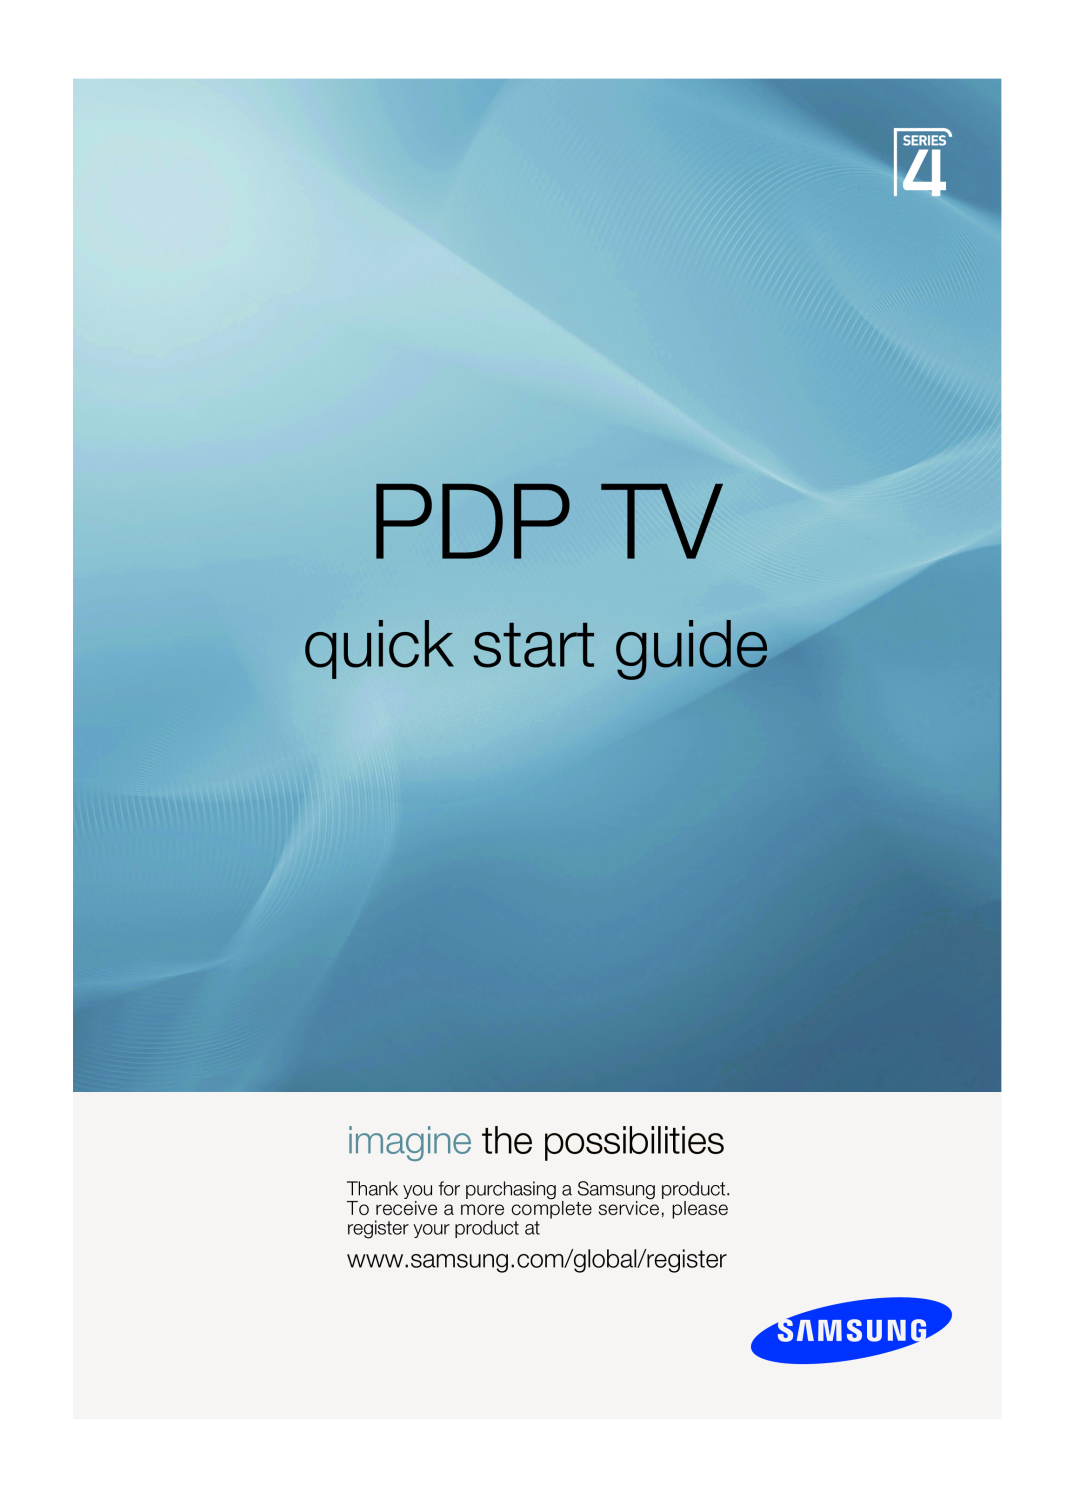 Samsung PDP TV quick start Pdp Tv, quick start guide, imagine the possibilities 